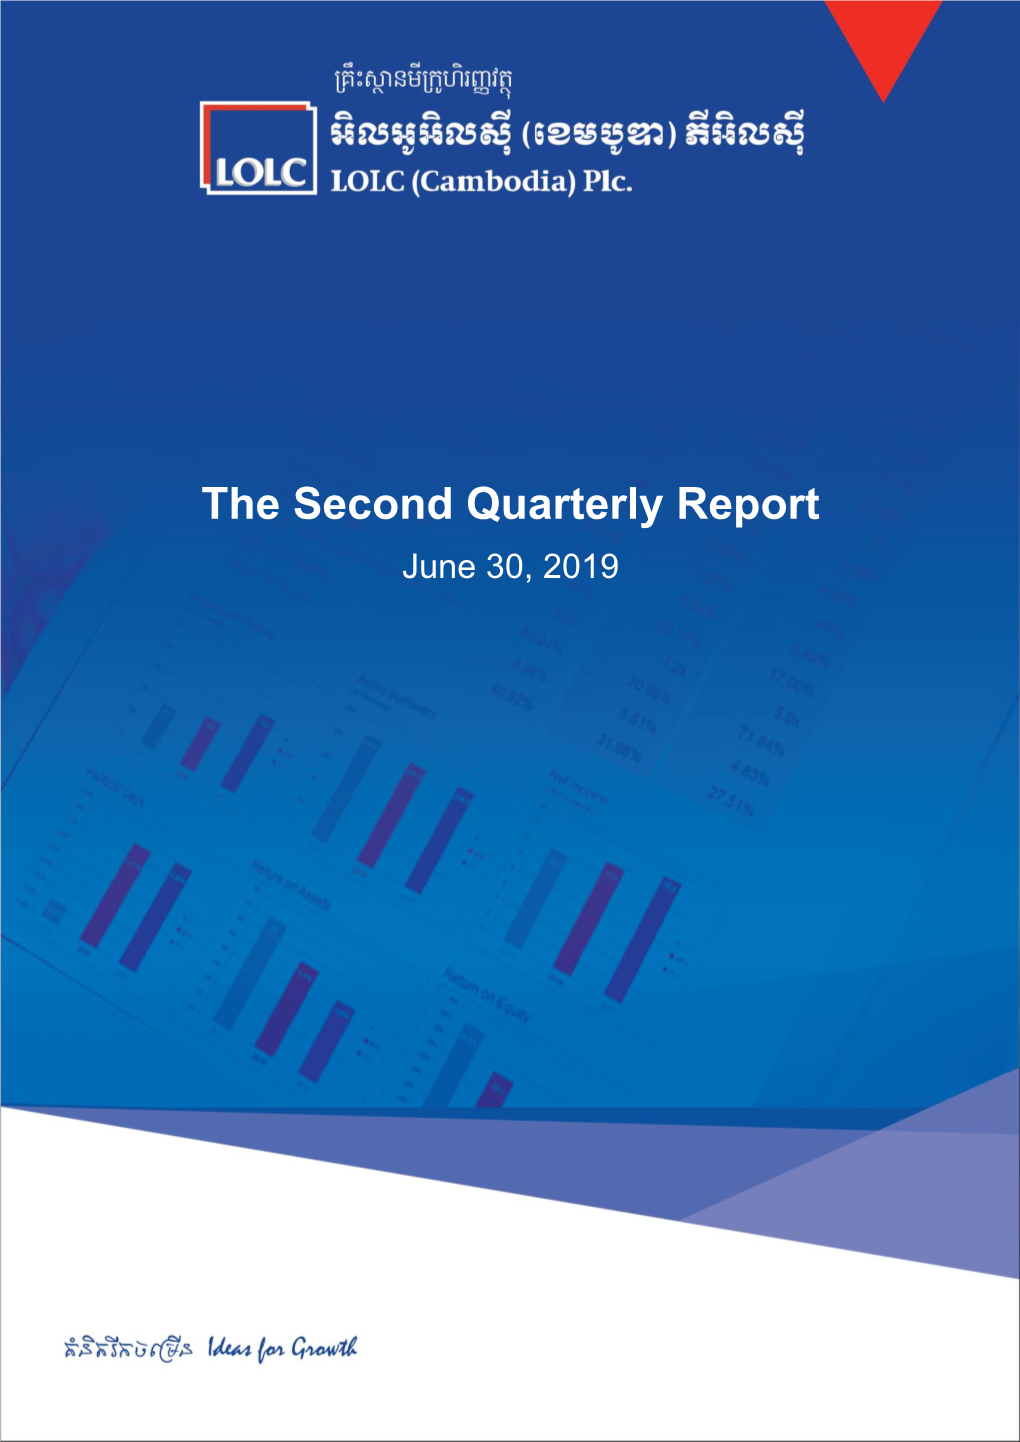 The Second Quarterly Report June 30, 2019